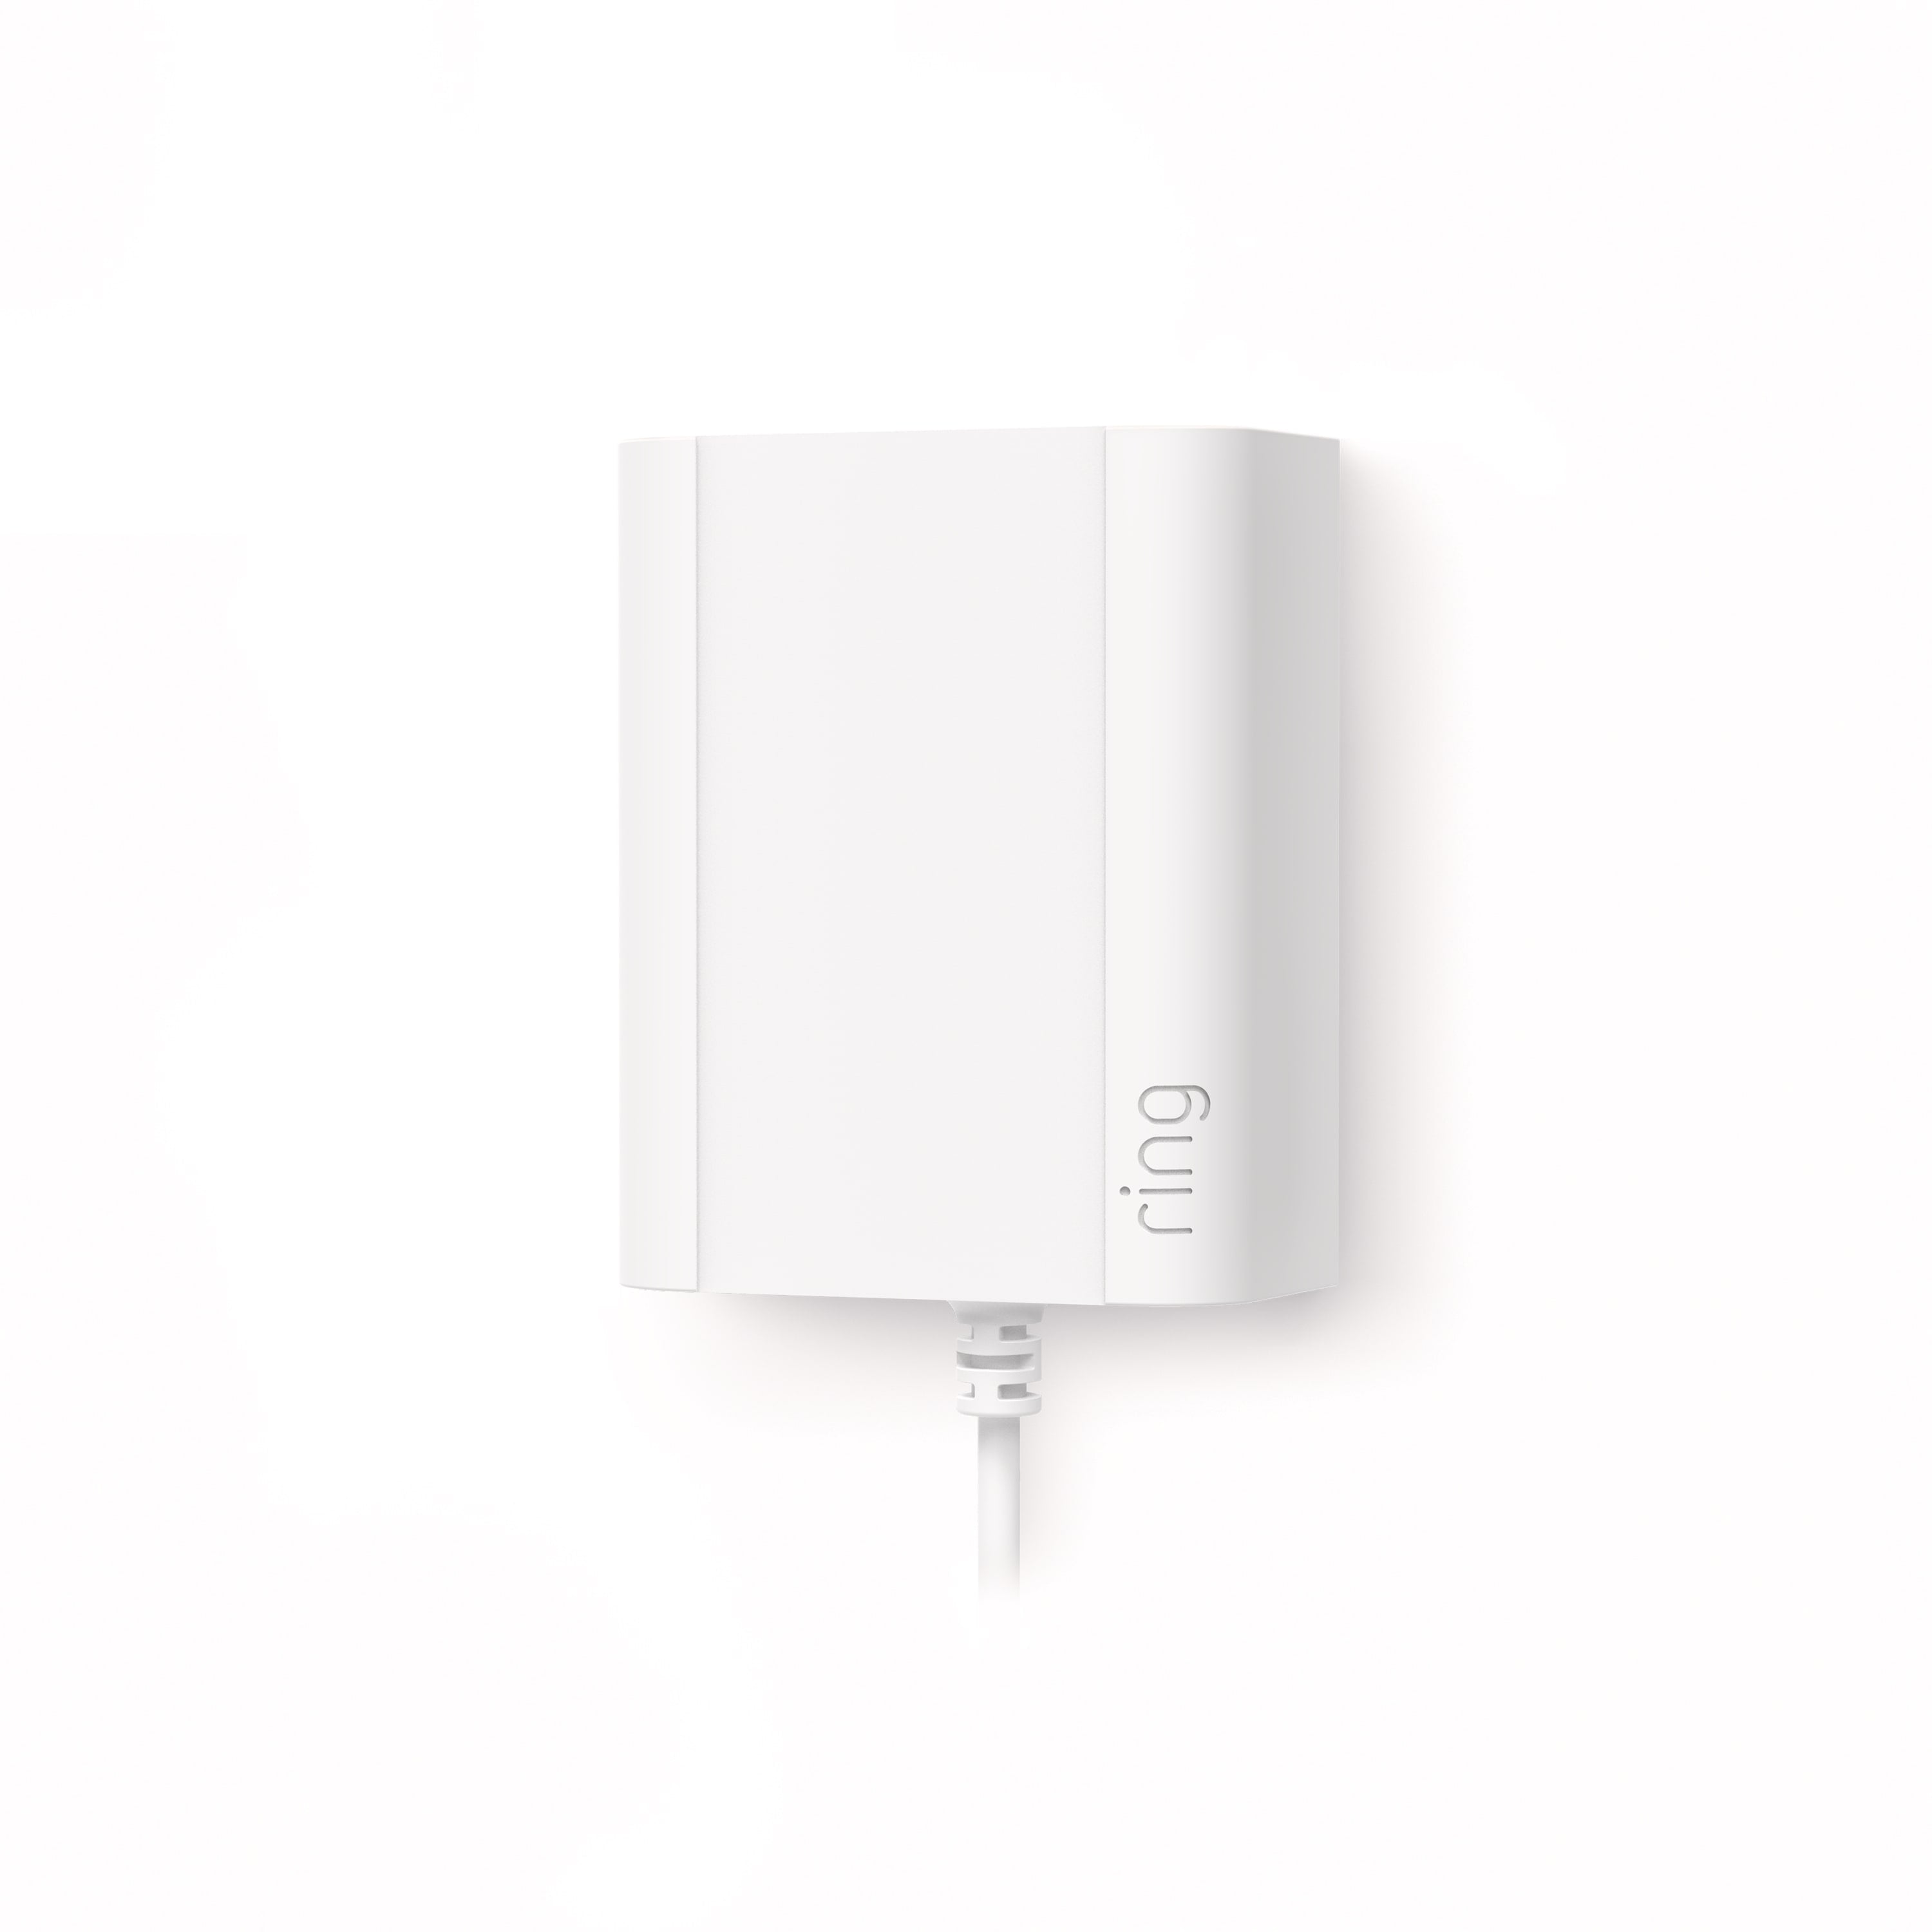 Plug-In Adapter (2nd Generation) (Video Doorbell Wired, Video Doorbell 3/3 Plus, Video Doorbell 4, Battery Doorbell Plus, Battery Doorbell Pro, Wired Doorbell Plus (Video Doorbell Pro), Wired Doorbell Pro (Video Doorbell Pro 2)) - Side view of Plug-In Adapter, 2nd Generation, in white